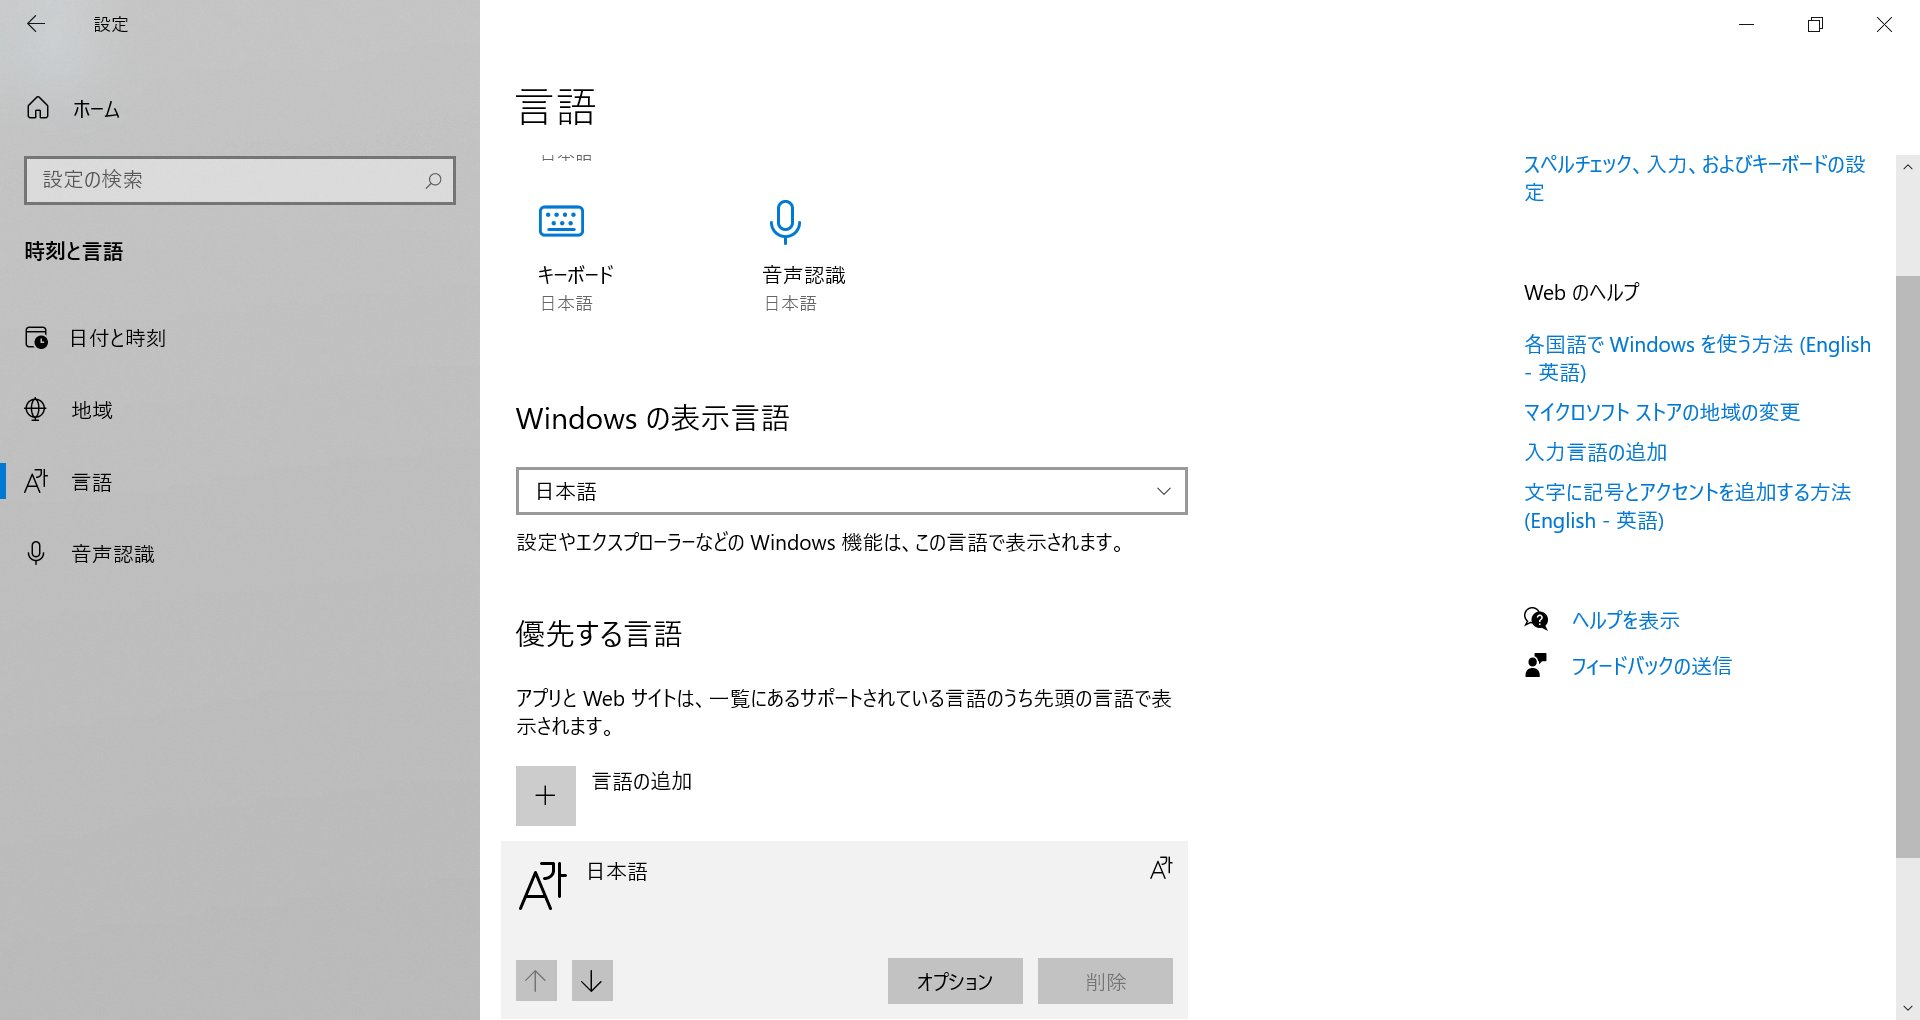 Windows standard language icons replace Han-gul instead of Chinese characters